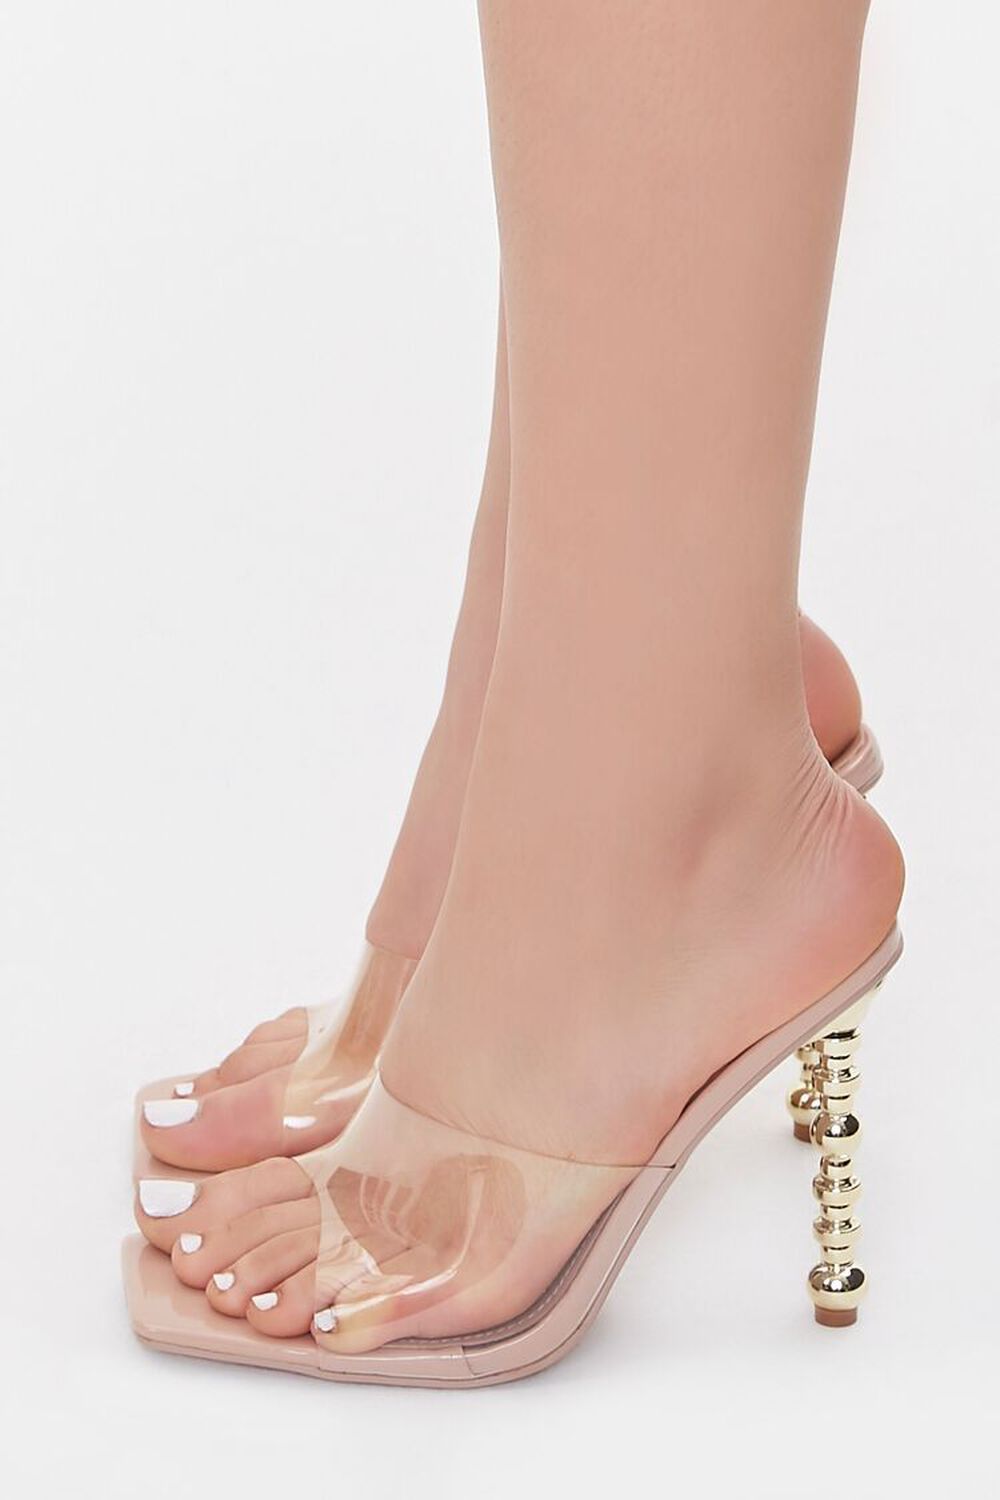 Forever 21, Shoes, Clear Glass Heels